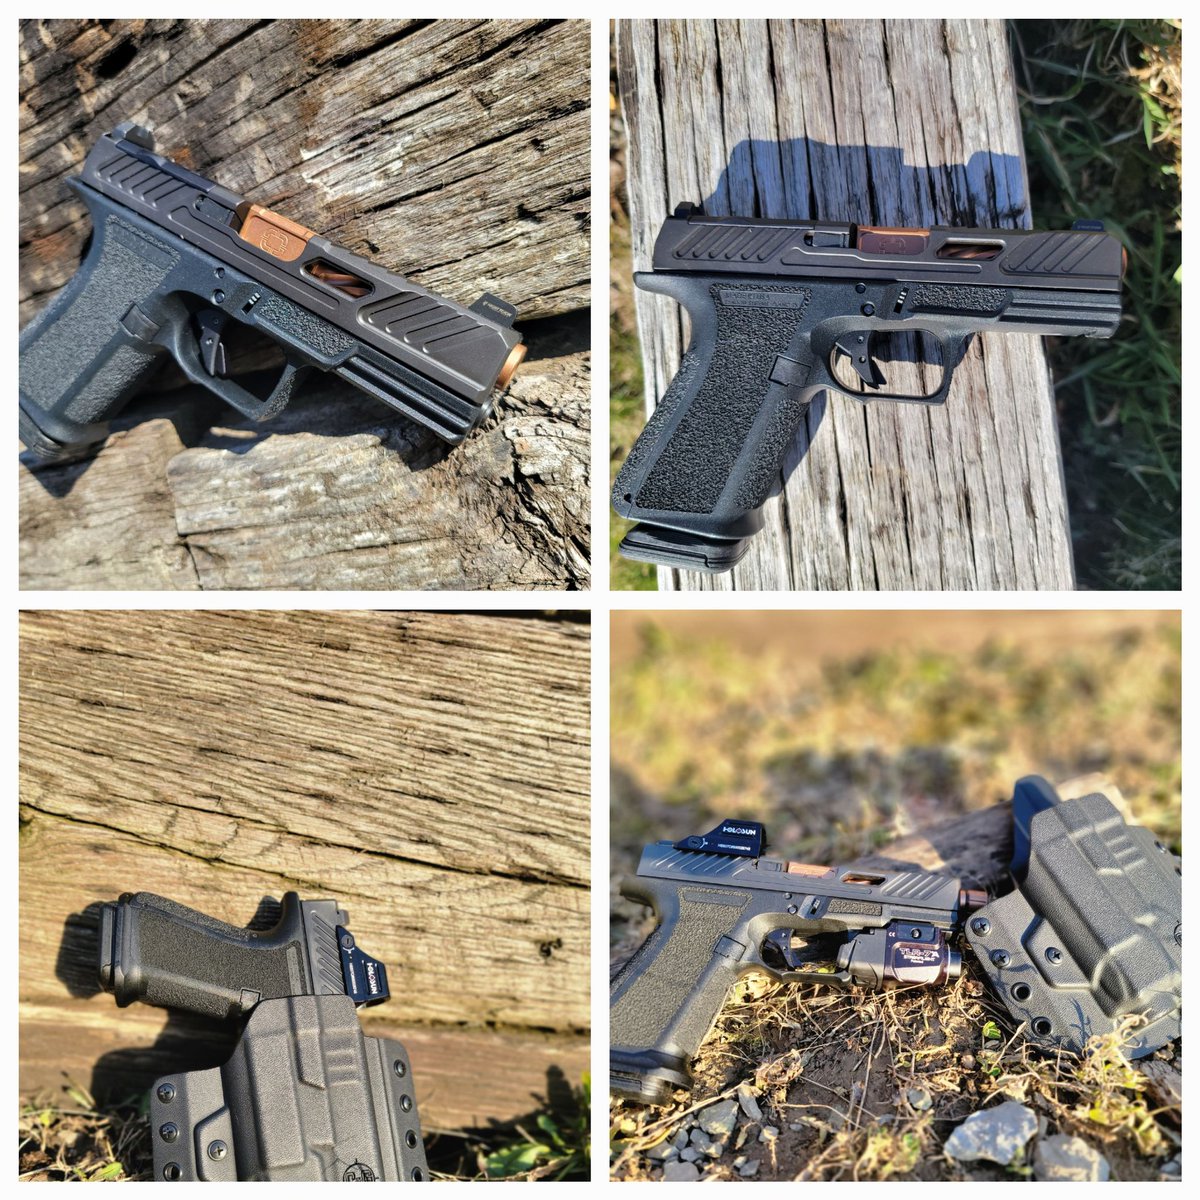 Shadow Systems and @candgarms along with @holosunoptics make for a perfect EDC package wouldn't you agree? 
Shop 24/7
DUKESSPORTSHOP.COM 
#guns #FireArms #firearm #dailygundose #gunsdaily #concealcarry #9mm #kydexholster #gunsgunsguns #Website #gundeals #coupons #combatguns